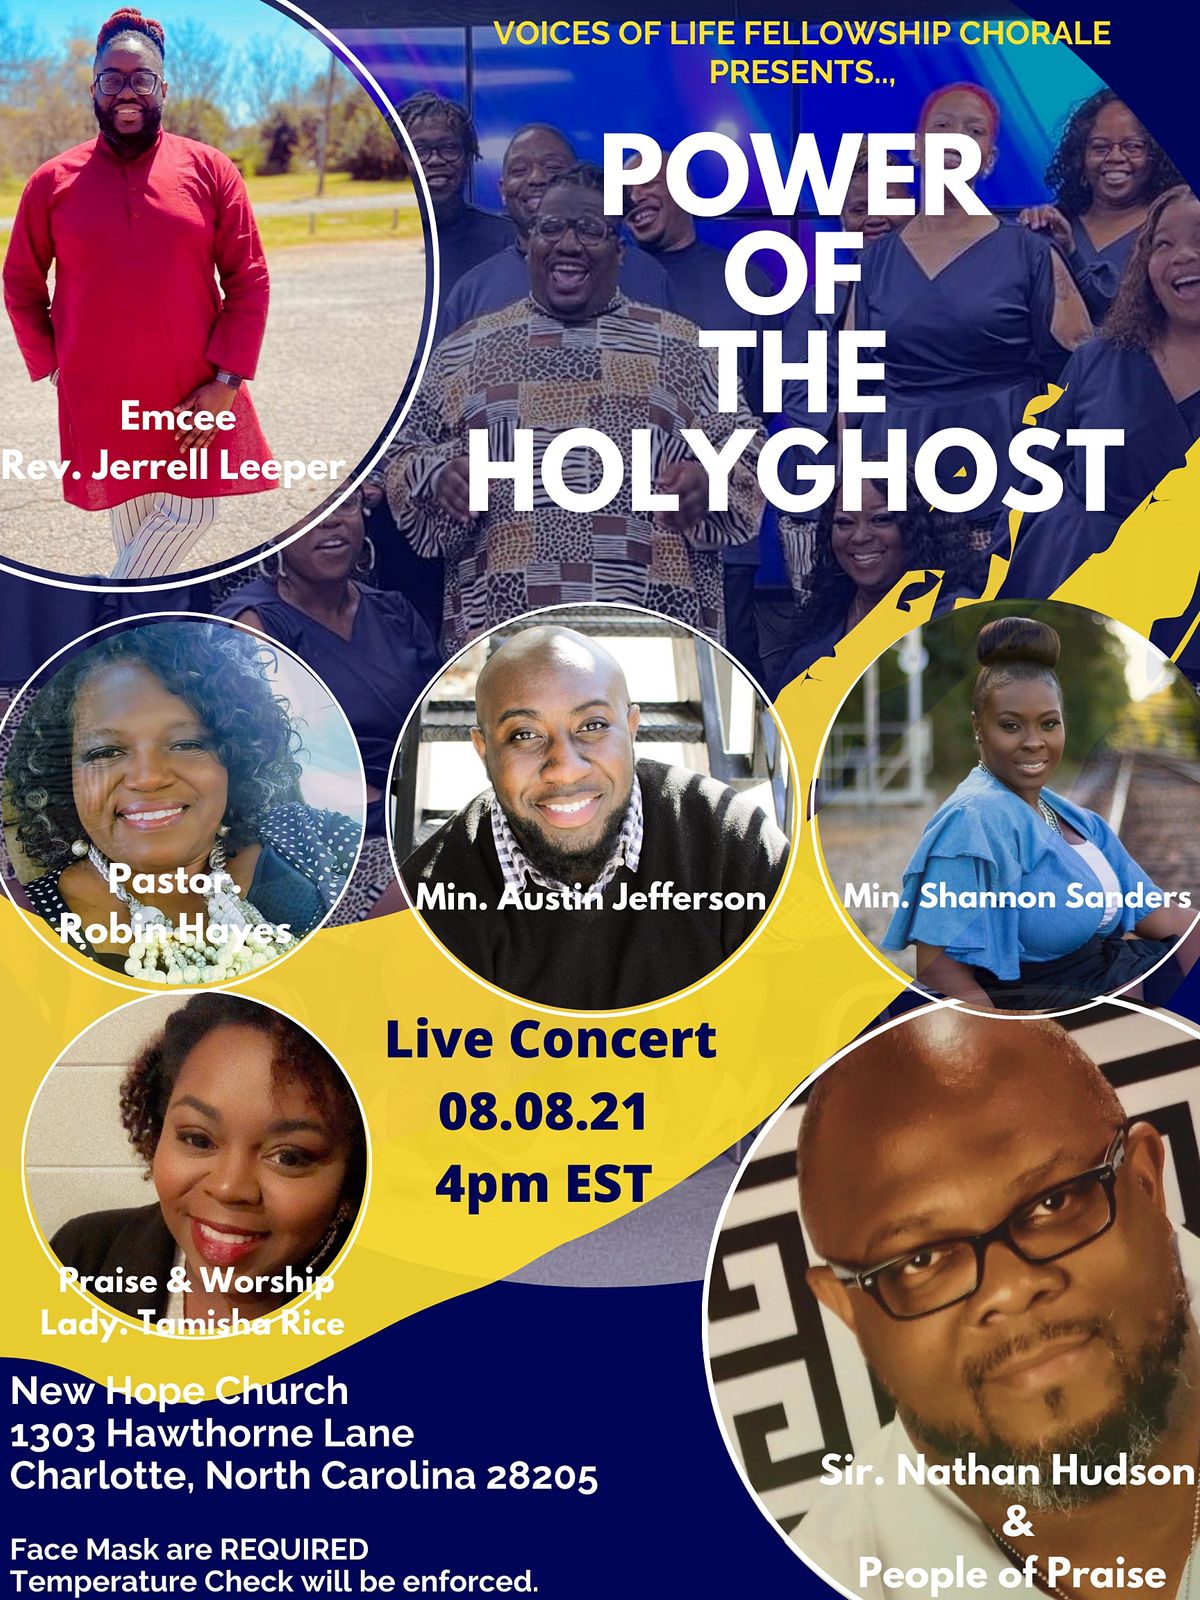 Voices of Life Fellowship Chorale 3rd Anniversary \u2018Power of the HOLYGHOST\u2019